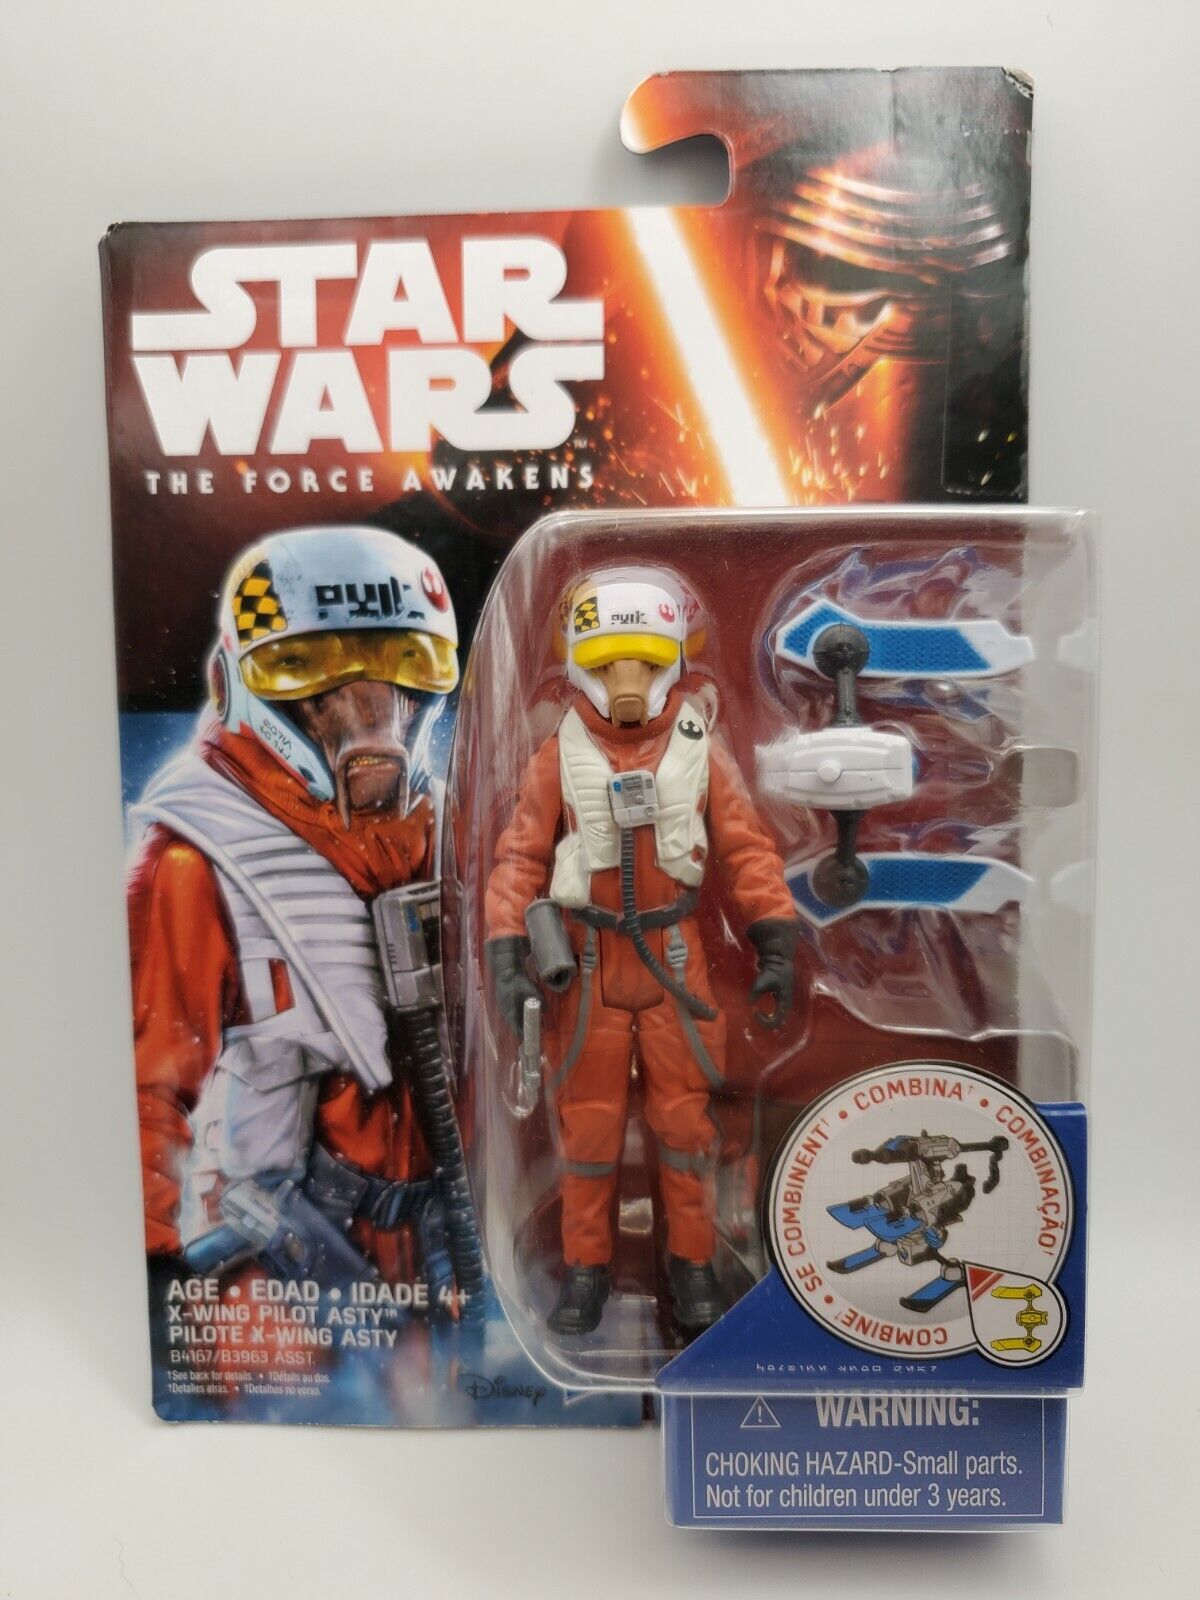 Star Wars X-Wing Pilot Asty Force Awakens Snow Mission 3.75 Inch Action Figure